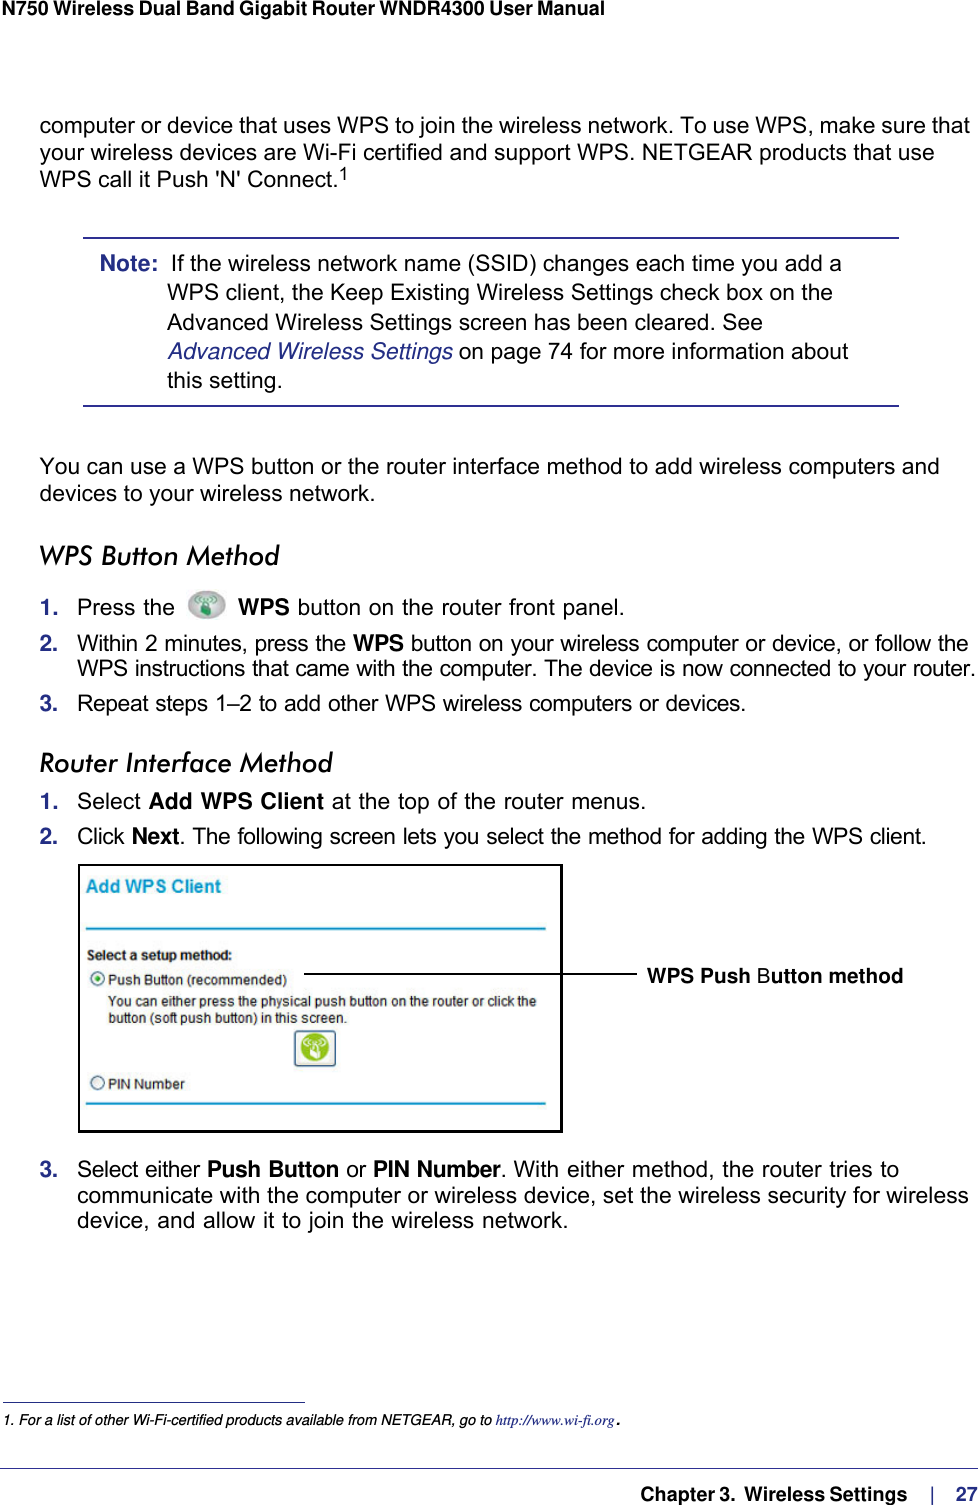   Chapter 3.  Wireless Settings     |    27N750 Wireless Dual Band Gigabit Router WNDR4300 User Manual computer or device that uses WPS to join the wireless network. To use WPS, make sure that your wireless devices are Wi-Fi certified and support WPS. NETGEAR products that use WPS call it Push &apos;N&apos; Connect.1 Note:  If the wireless network name (SSID) changes each time you add a WPS client, the Keep Existing Wireless Settings check box on the Advanced Wireless Settings screen has been cleared. See Advanced Wireless Settings on page  74 for more information about this setting.You can use a WPS button or the router interface method to add wireless computers and devices to your wireless network.WPS Button Method1.  Press the   WPS button on the router front panel.2.  Within 2 minutes, press the WPS button on your wireless computer or device, or follow the WPS instructions that came with the computer. The device is now connected to your router.3.  Repeat steps 1–2 to add other WPS wireless computers or devices.Router Interface Method1.  Select Add WPS Client at the top of the router menus. 2.  Click Next. The following screen lets you select the method for adding the WPS client.WPS Push Button method3.  Select either Push Button or PIN Number. With either method, the router tries to communicate with the computer or wireless device, set the wireless security for wireless device, and allow it to join the wireless network.1. For a list of other Wi-Fi-certified products available from NETGEAR, go to http://www.wi-fi.org.